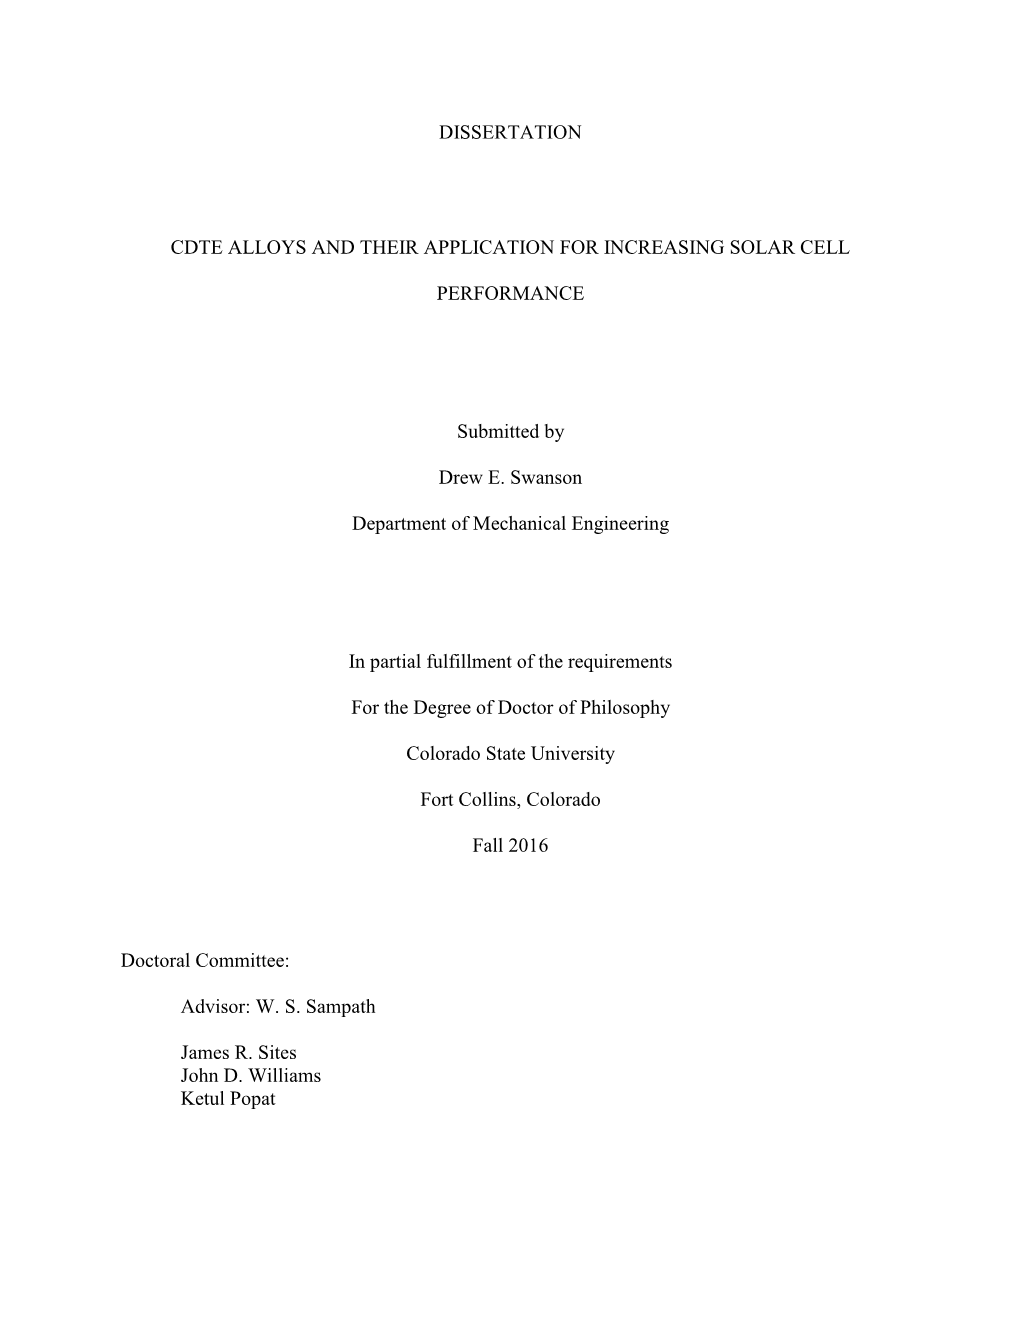 Dissertation Cdte Alloys and Their Application For